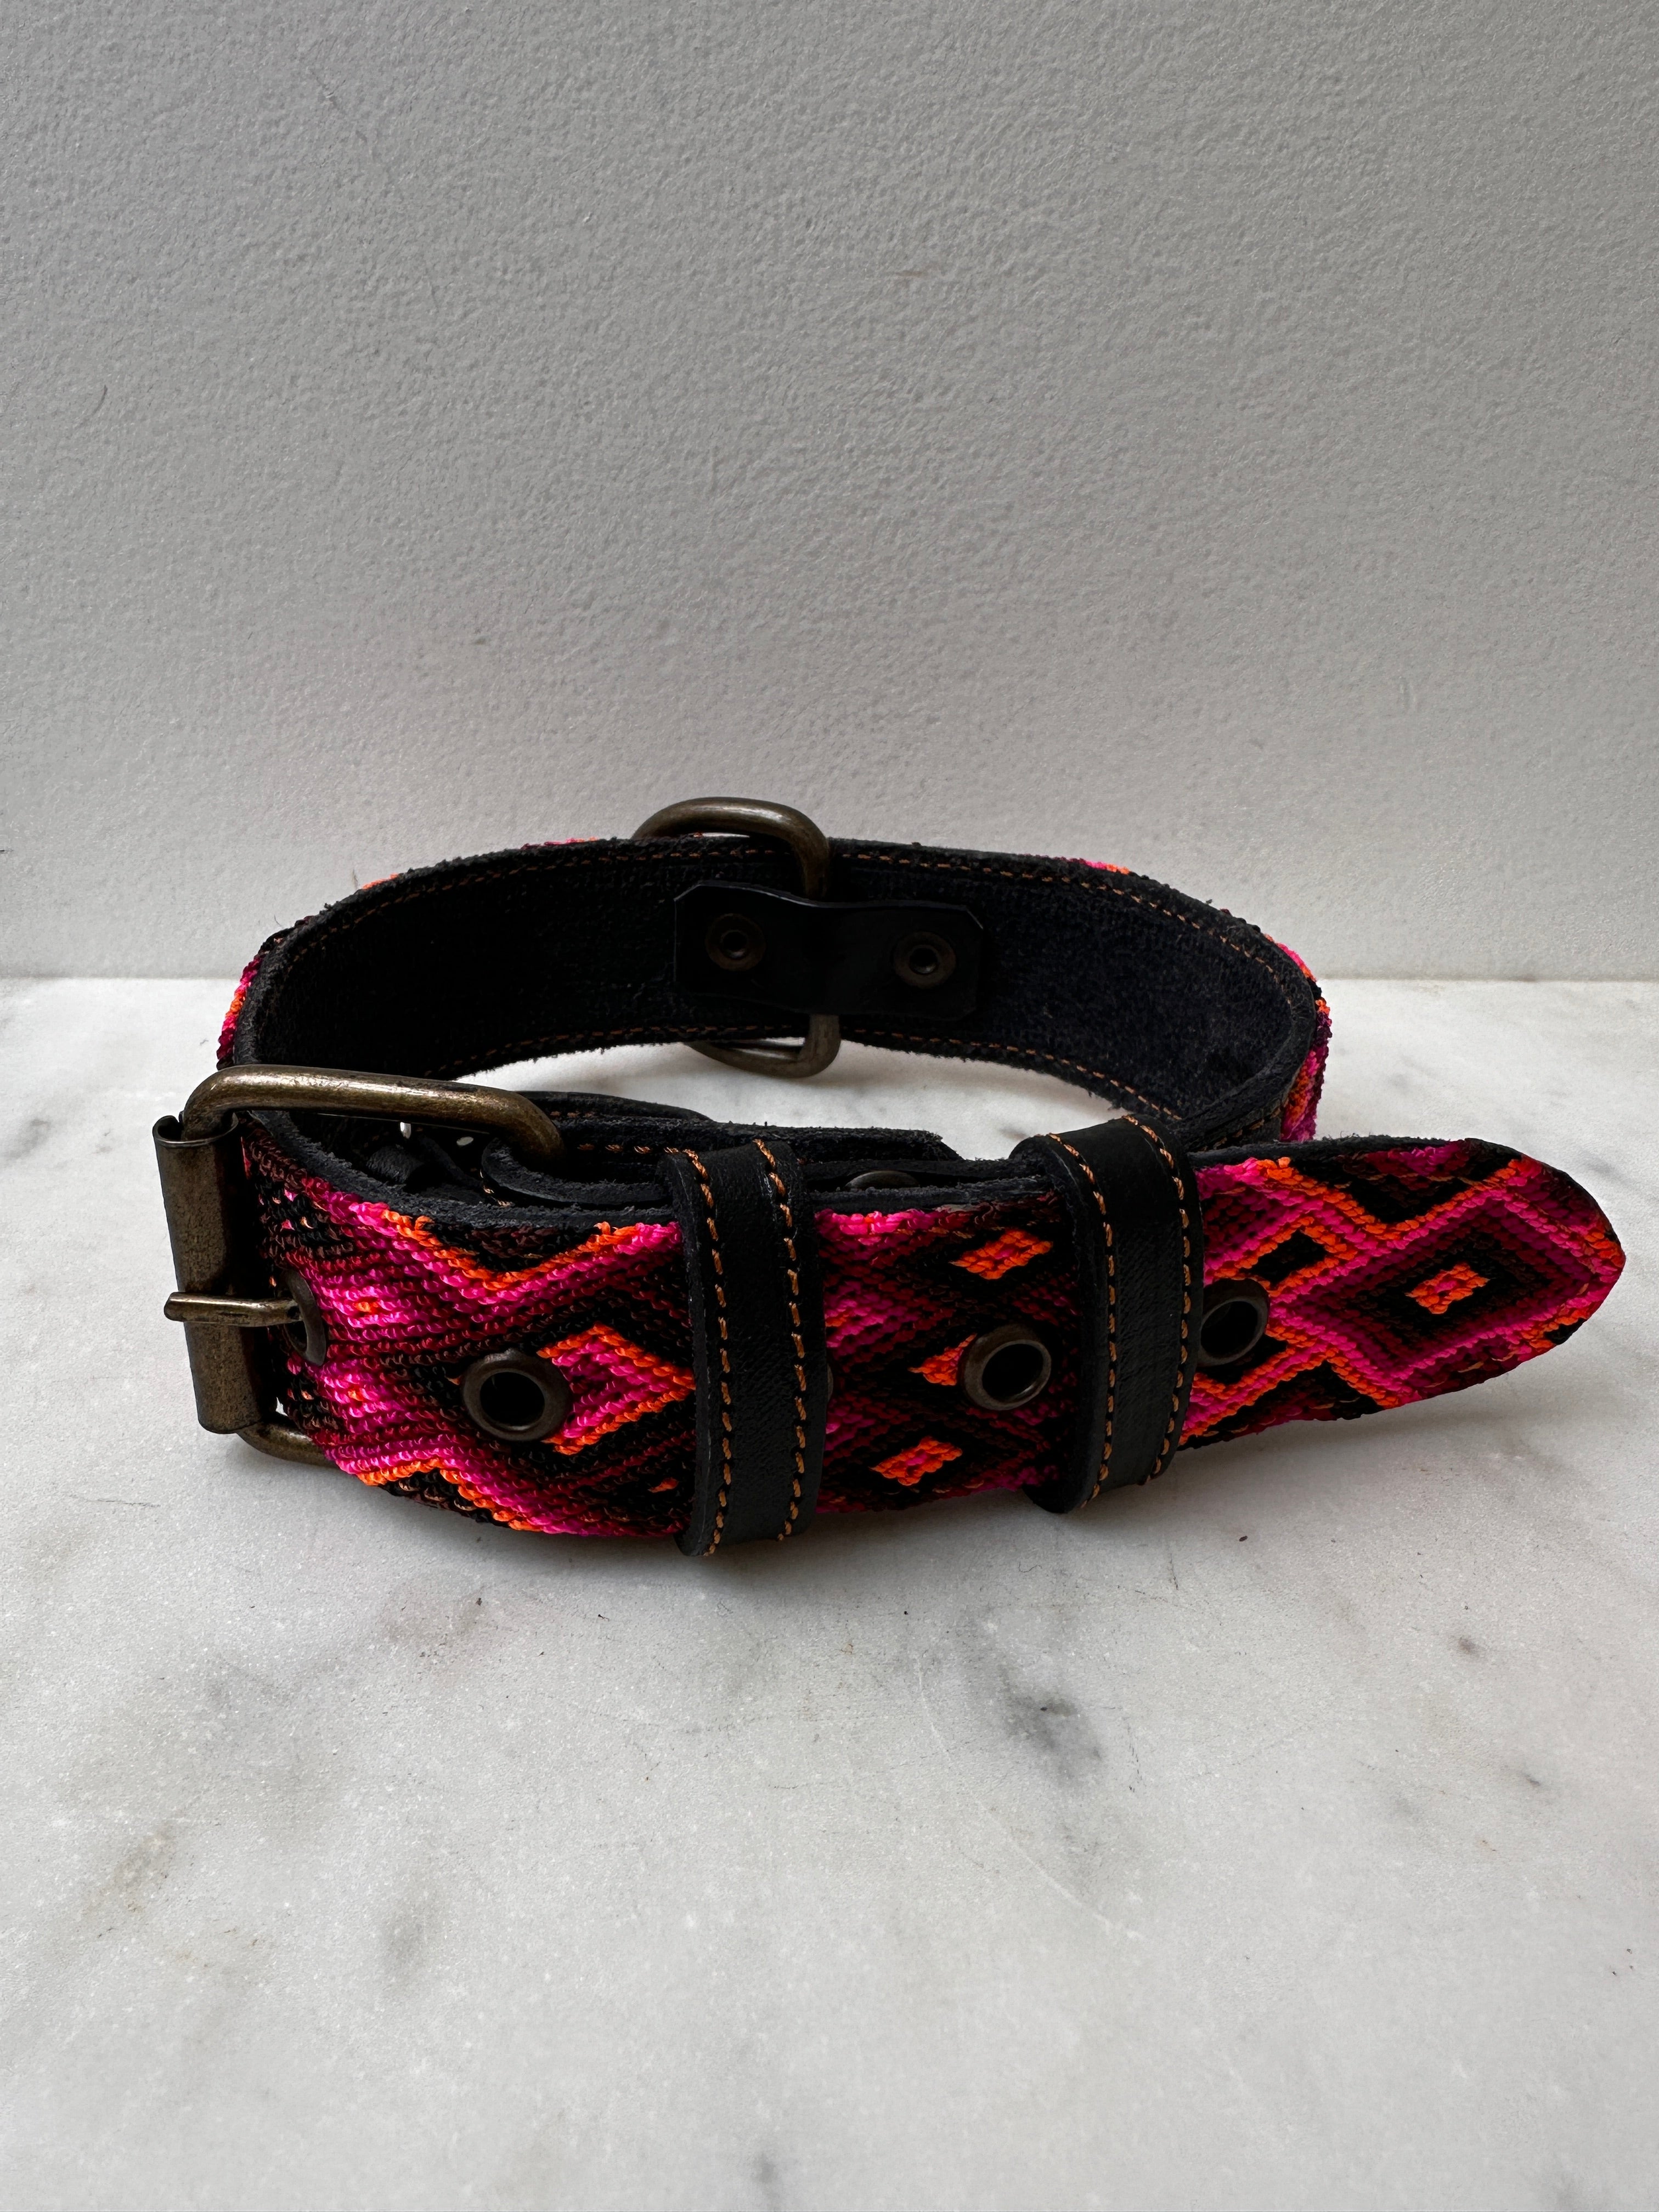 Future Nomads Homewares One Size Huichol Embroidered Wide Dog Collar M4